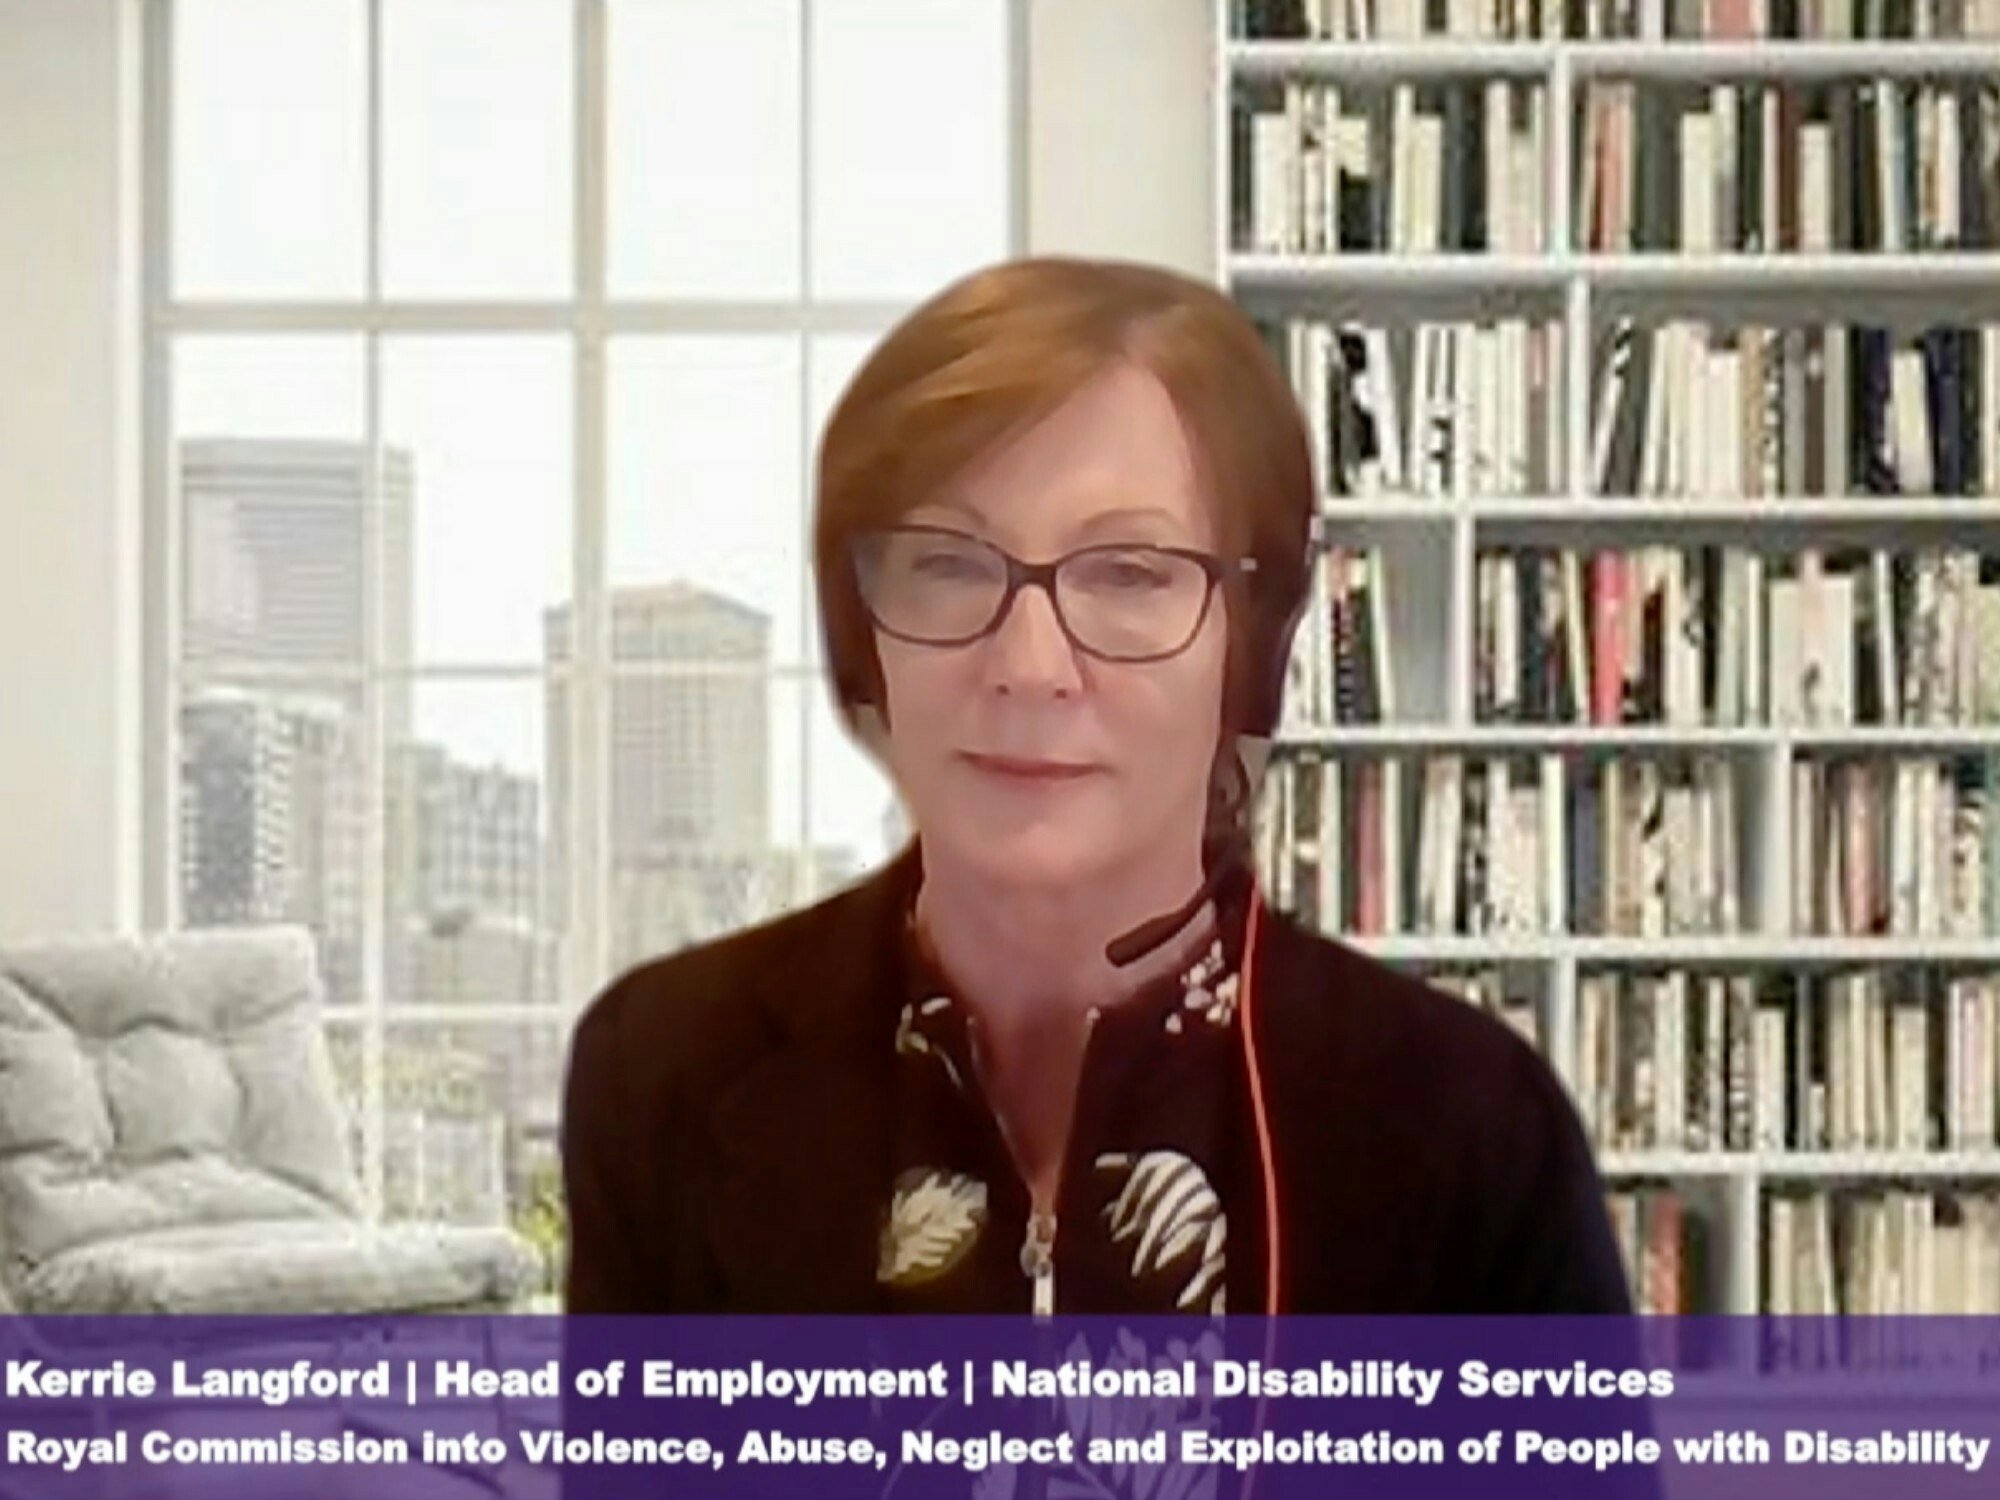 <p>National Disability Services Head of Employment Kerrie Langford told the Disability Royal Commission the organisation has a vision for change in ADEs. [Source: Disability Royal Commission]</p>
